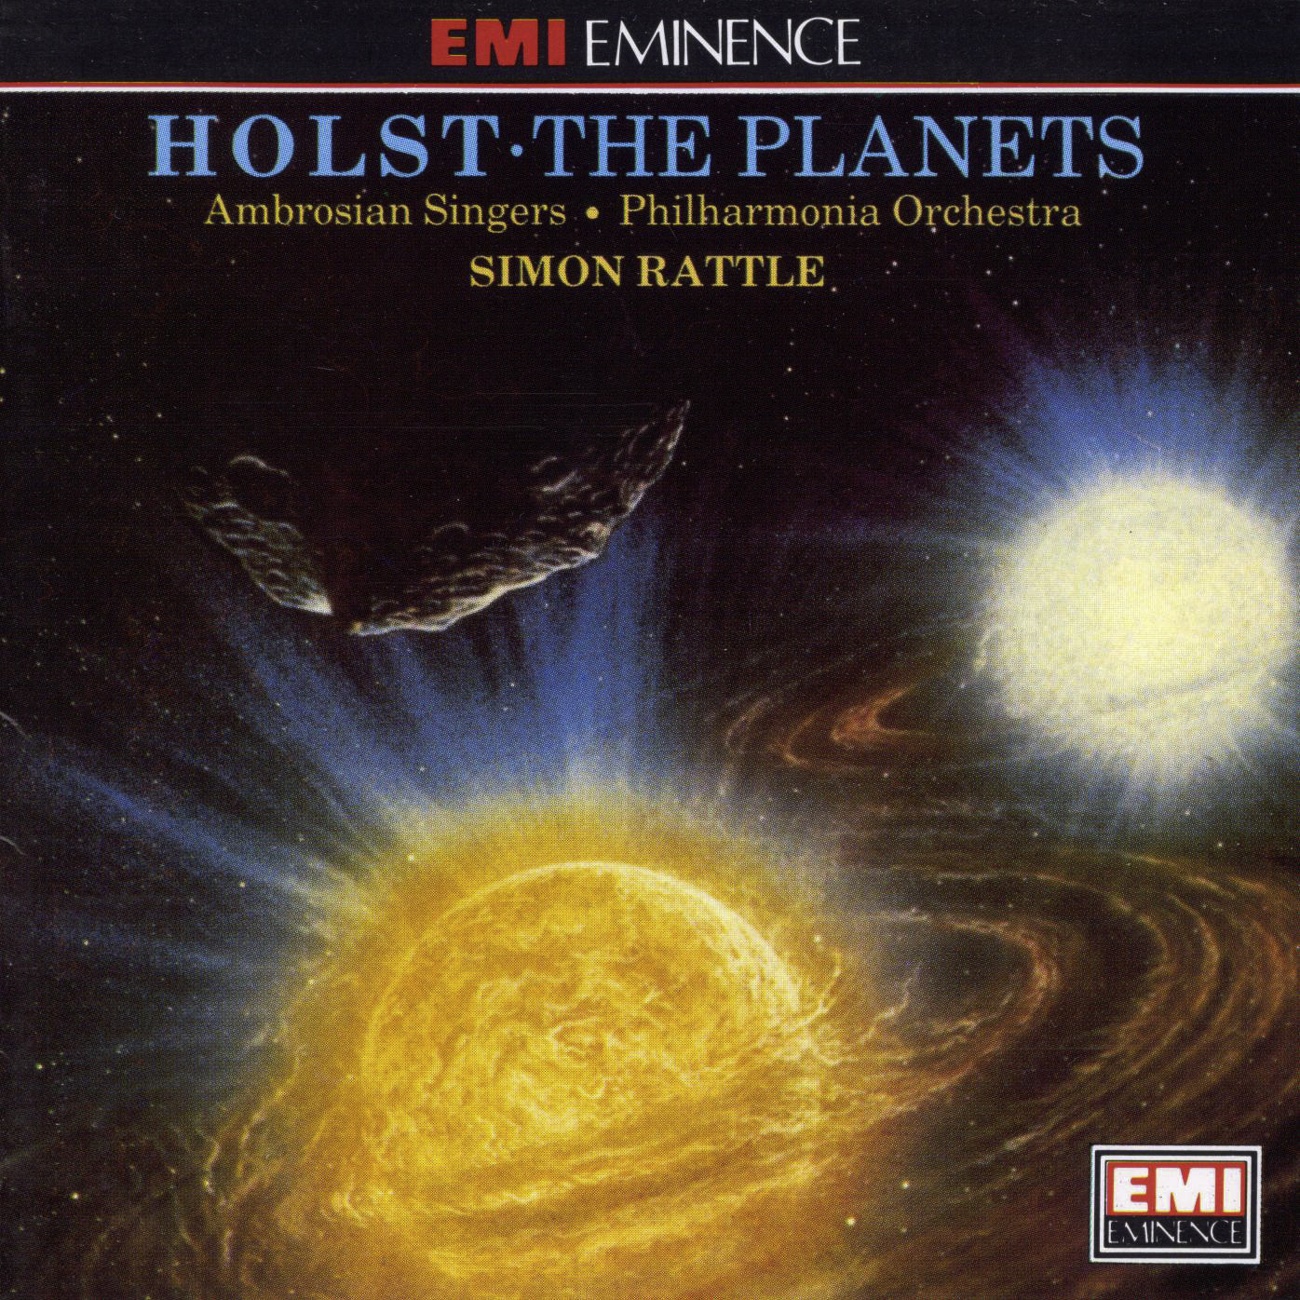 The Planets, Op. 32: 5. Saturn, the Bringer of Old Age (Adagio)